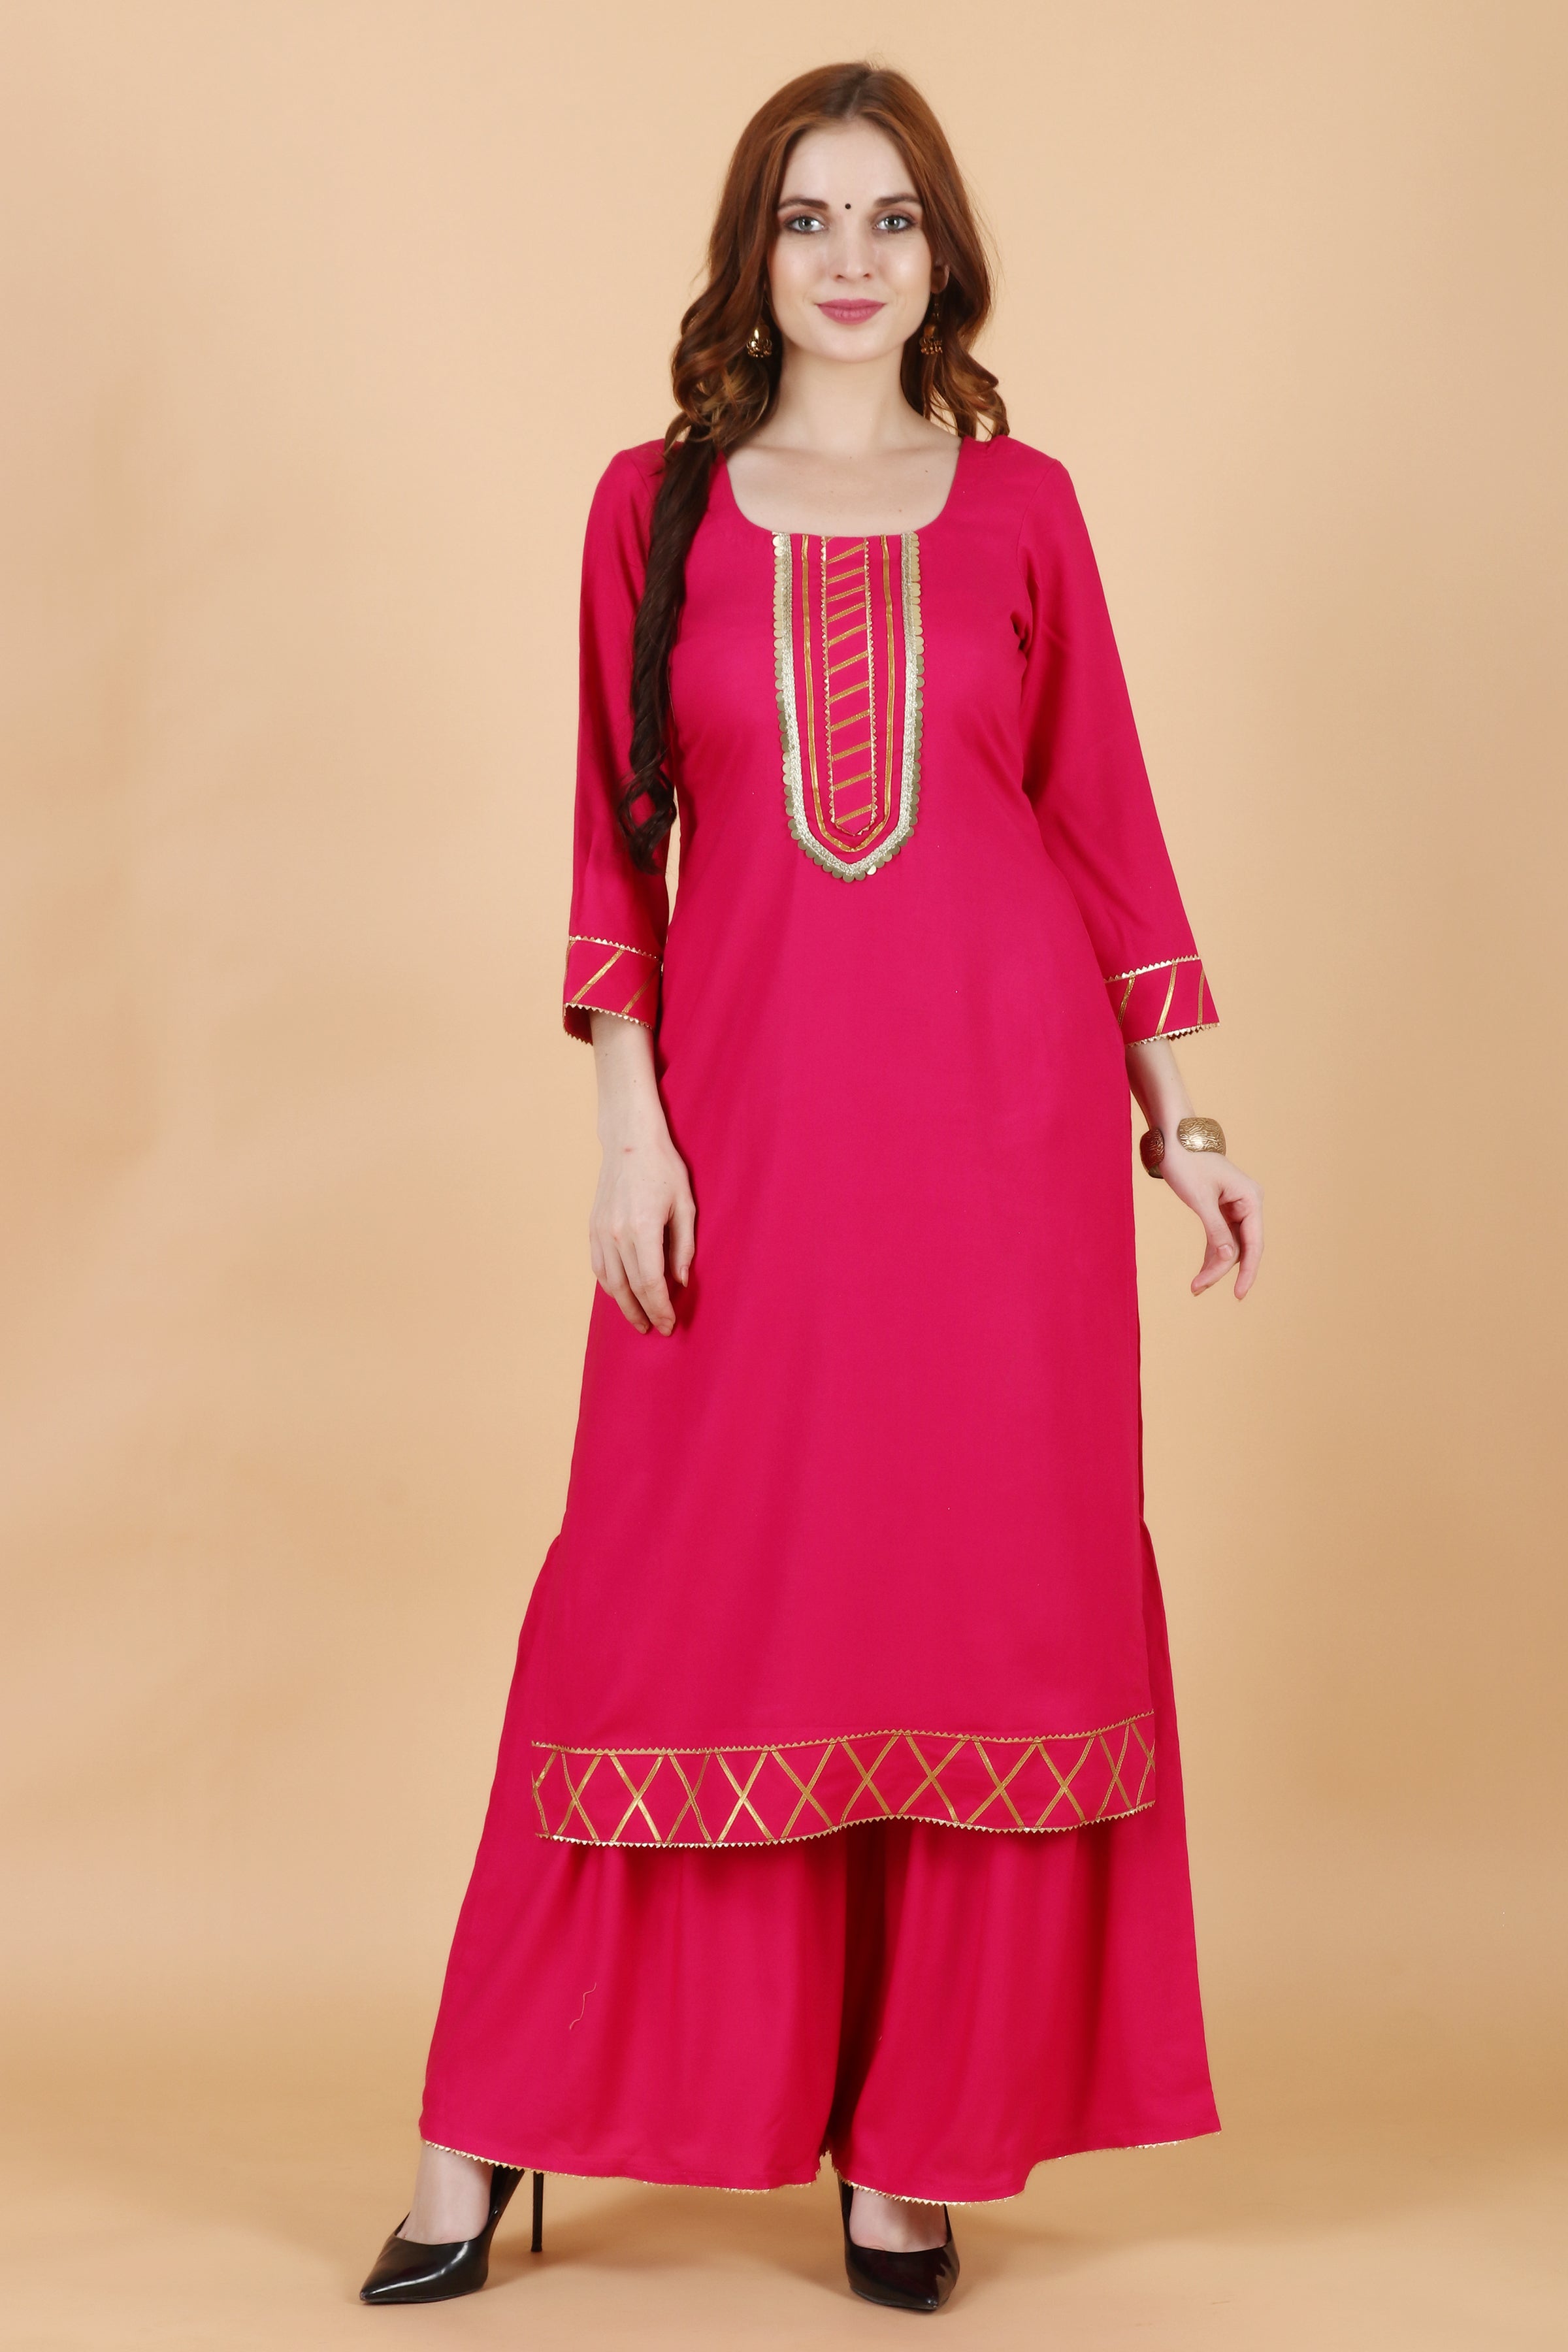 Georgette Embroidered Party Wear Sharara Suit, mix color at Rs 1499/piece  in Surat